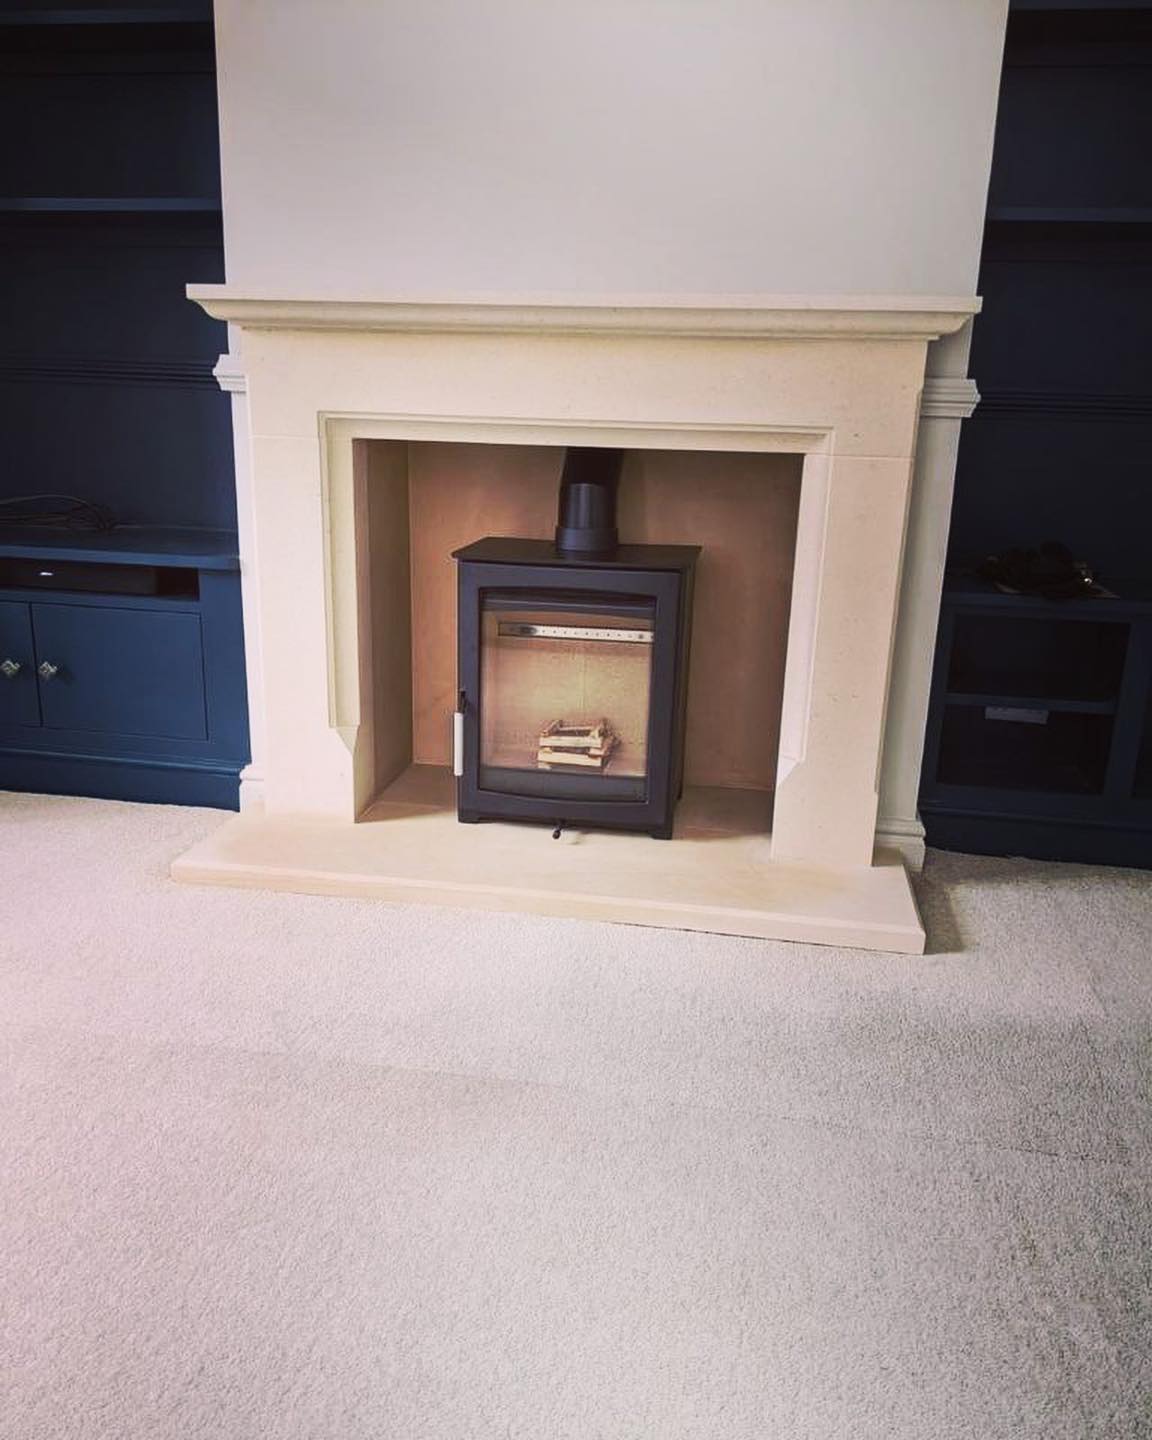 Parkray Aspect 5 Wood Burner With Stone Fireplace Installed In Tarporley